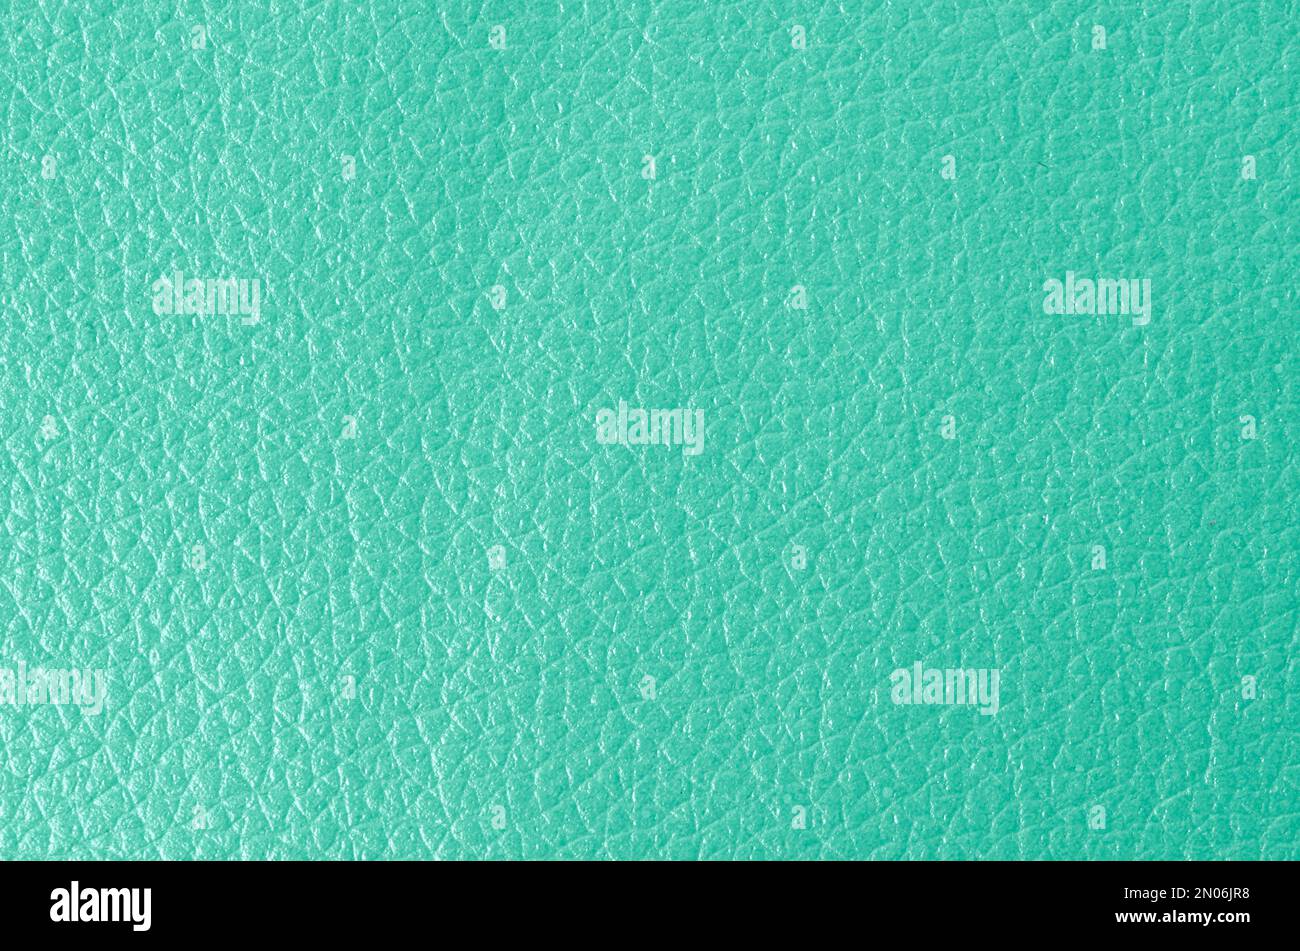 Texture of genuine grainy leather of light mint green color for wallpaper or banner design. Fashionable modern background, copy space Stock Photo